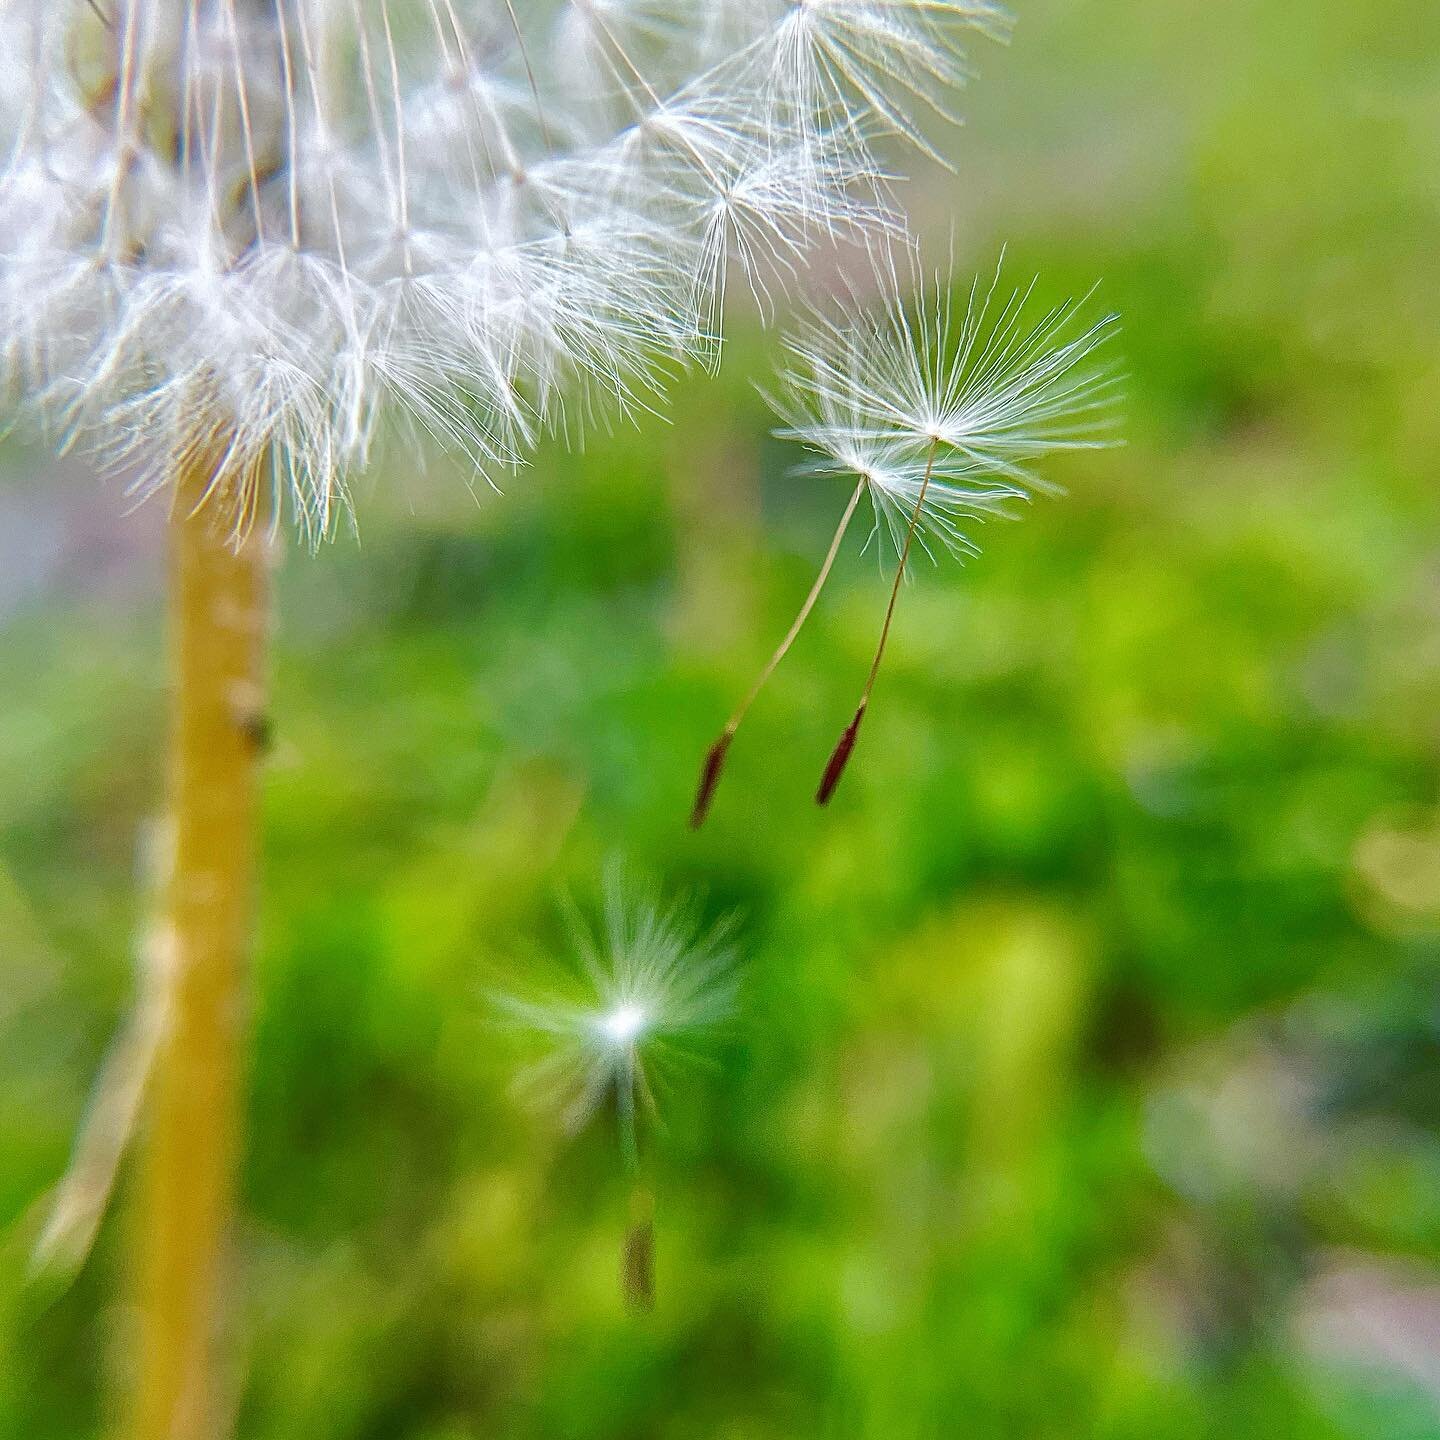 Just a tiny little seed being magical I the big world. 

#tiny #seed #dandelion #texas #macro #photography